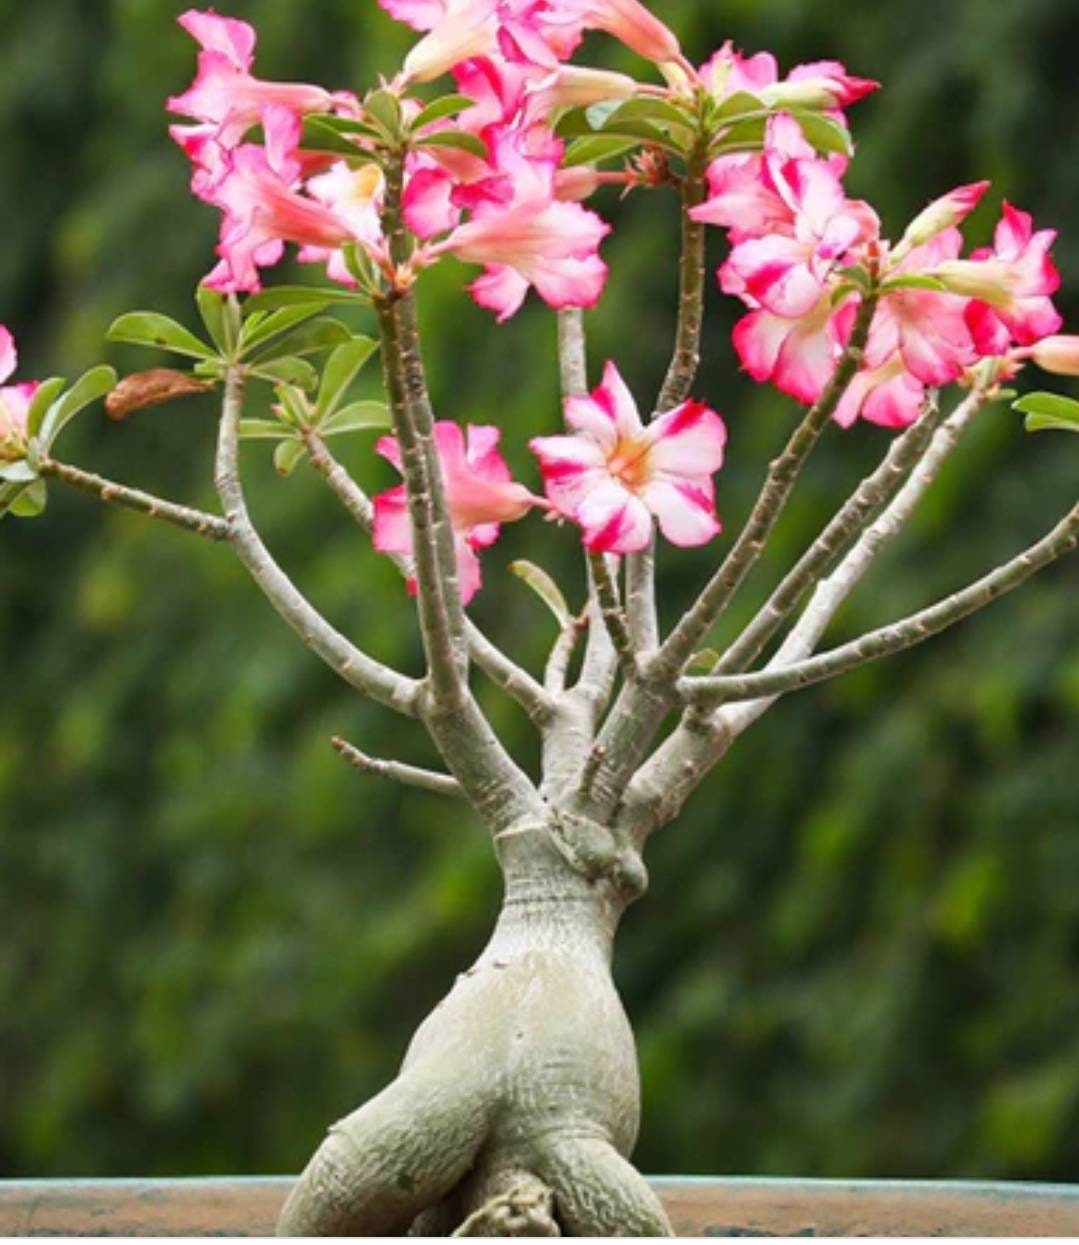 Adenium Obesum Also Known as Desert Rose 4 to 5 Years Old - Etsy